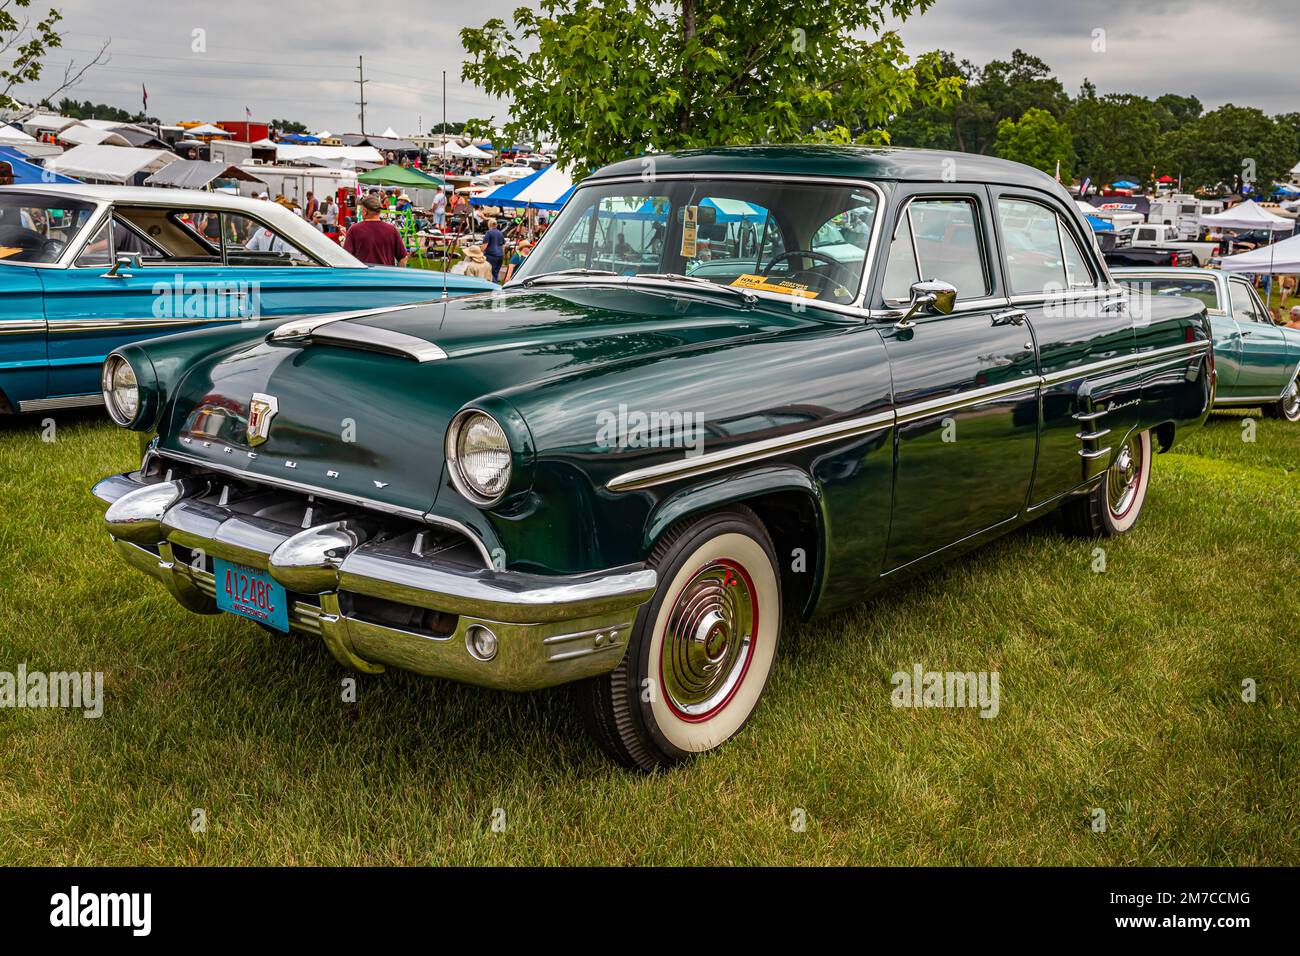 Iola, WI - July 07, 2022: High perspective front corner view of a 1953 Mercury Monterey 4 Door Sedan at a local car show. Stock Photo